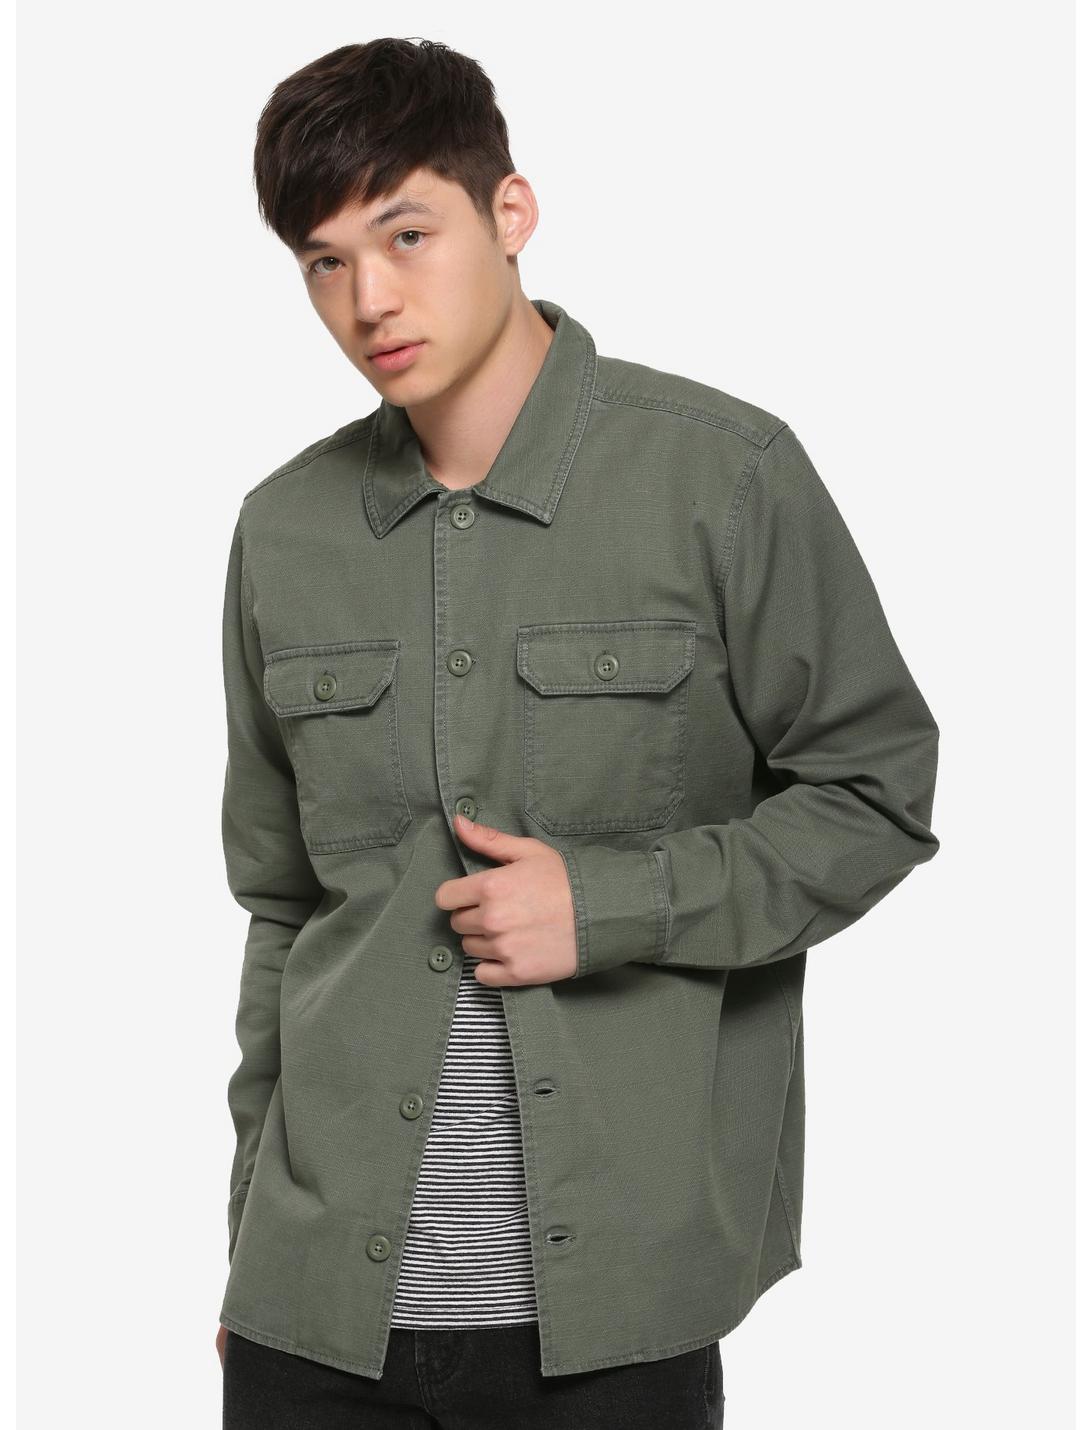 Olive Woven Button-Up, OLIVE, hi-res